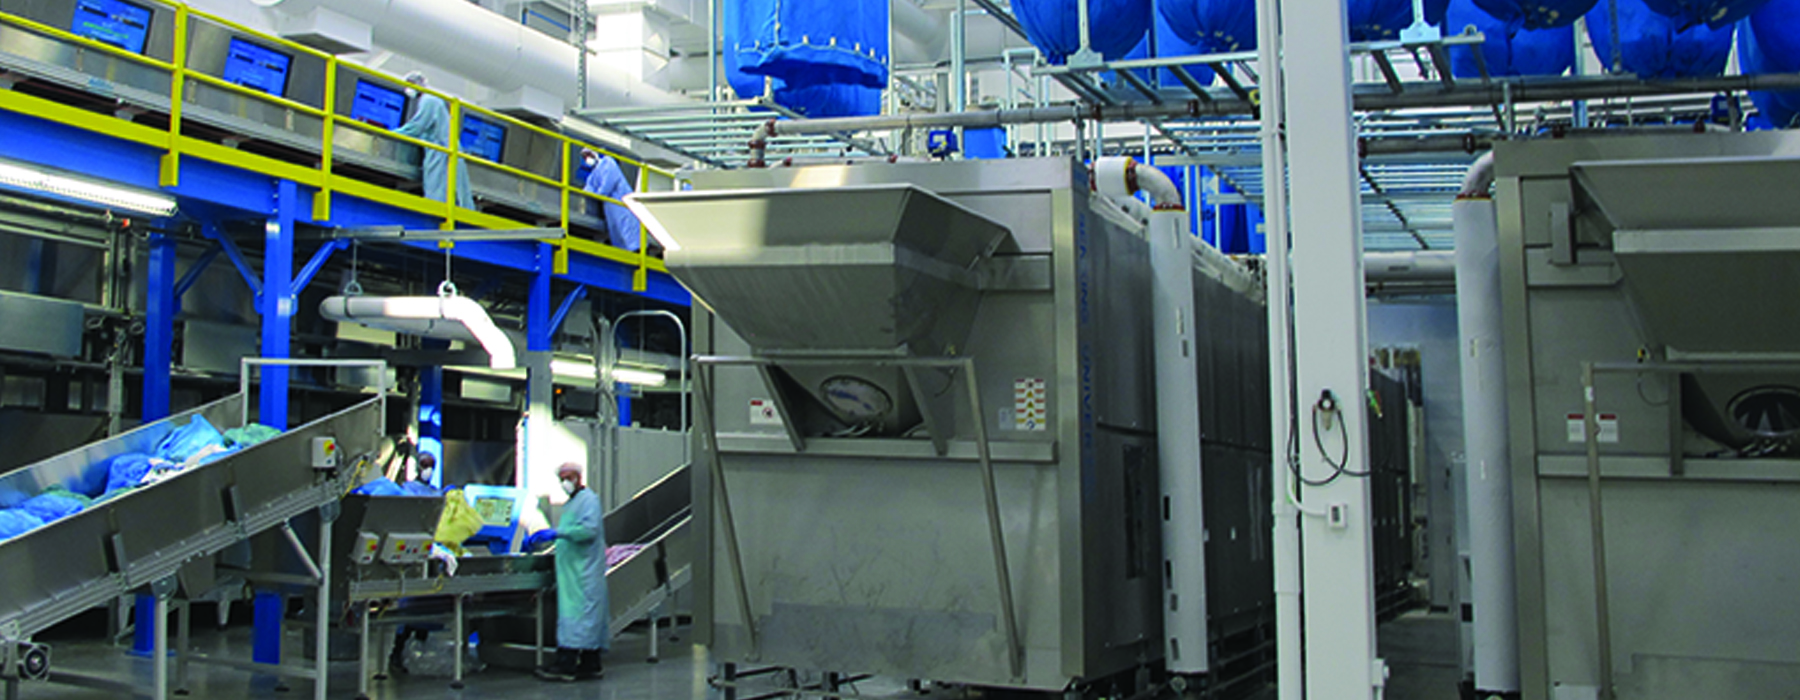 Linen provider achieves industry-best accreditation